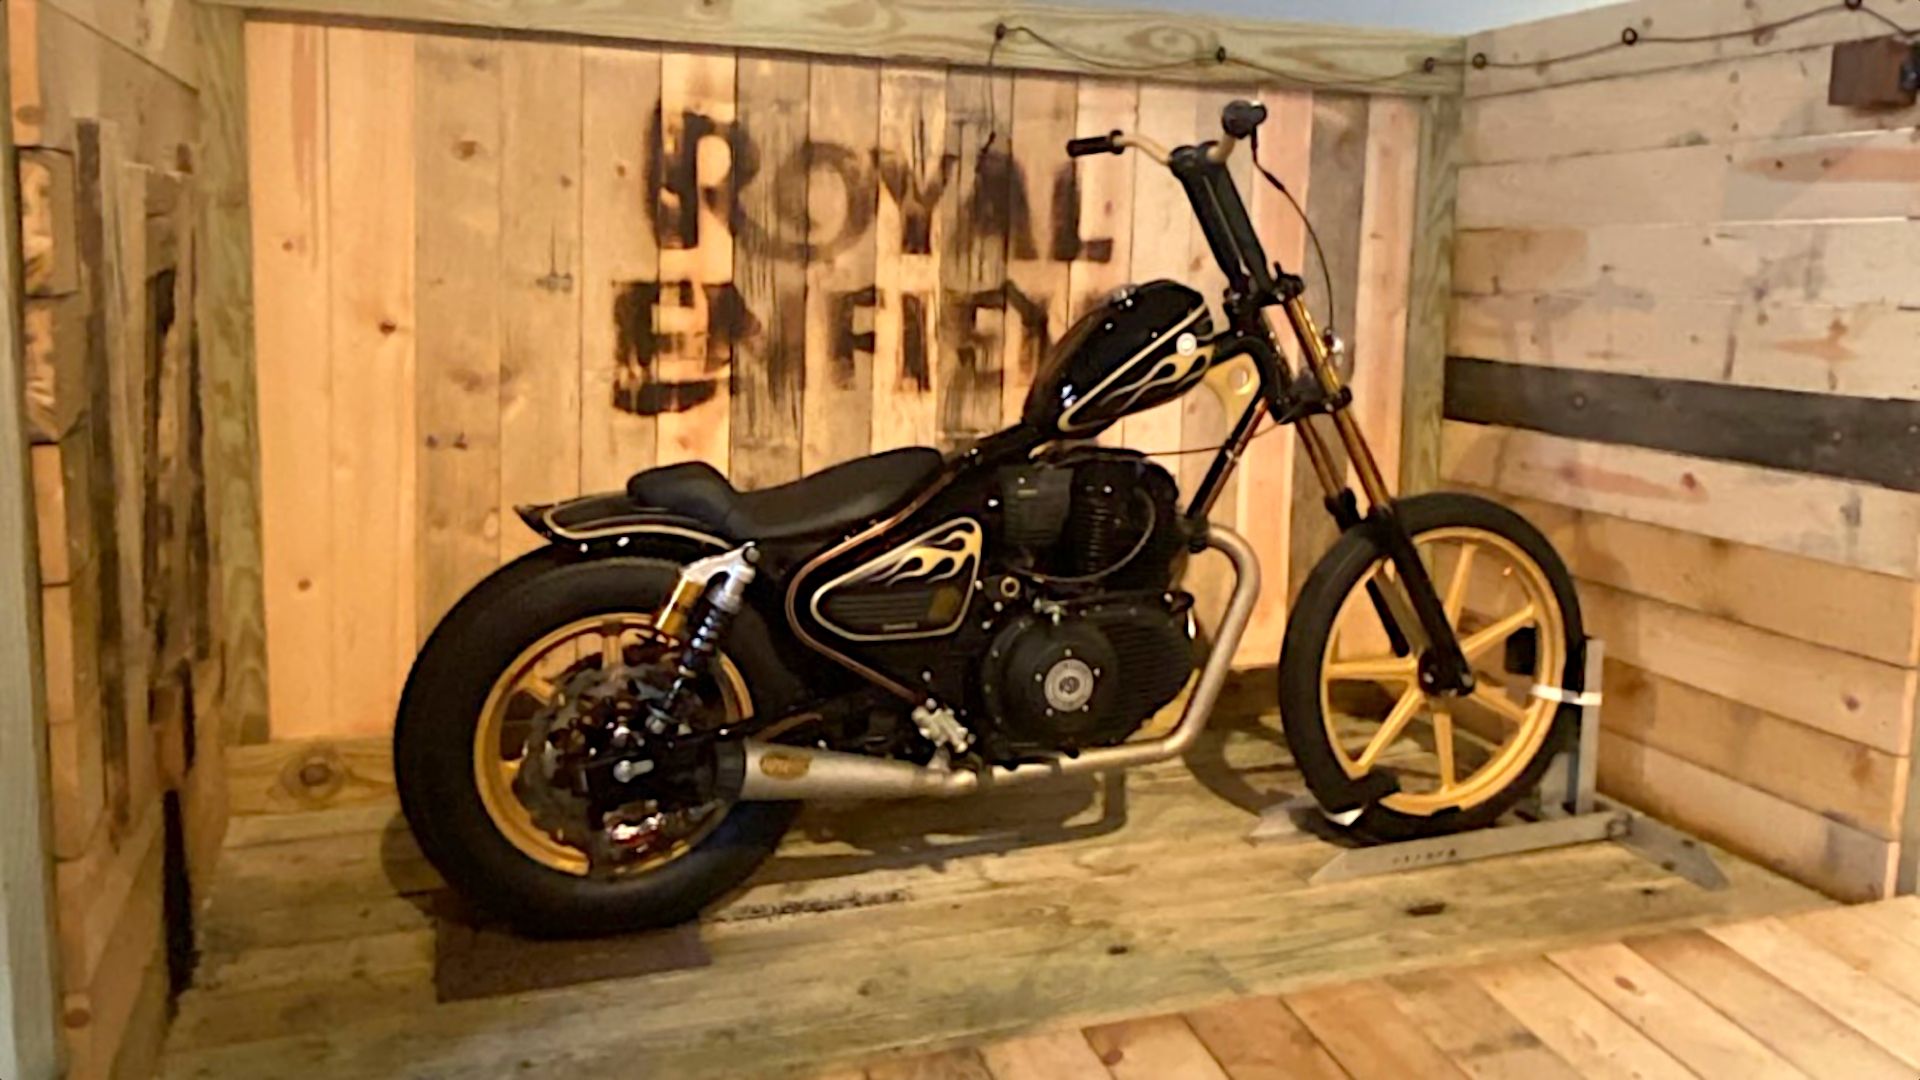 Royal Enfield Super Meteor 650 Customized By Roland Sands Is A Menacing Chopper